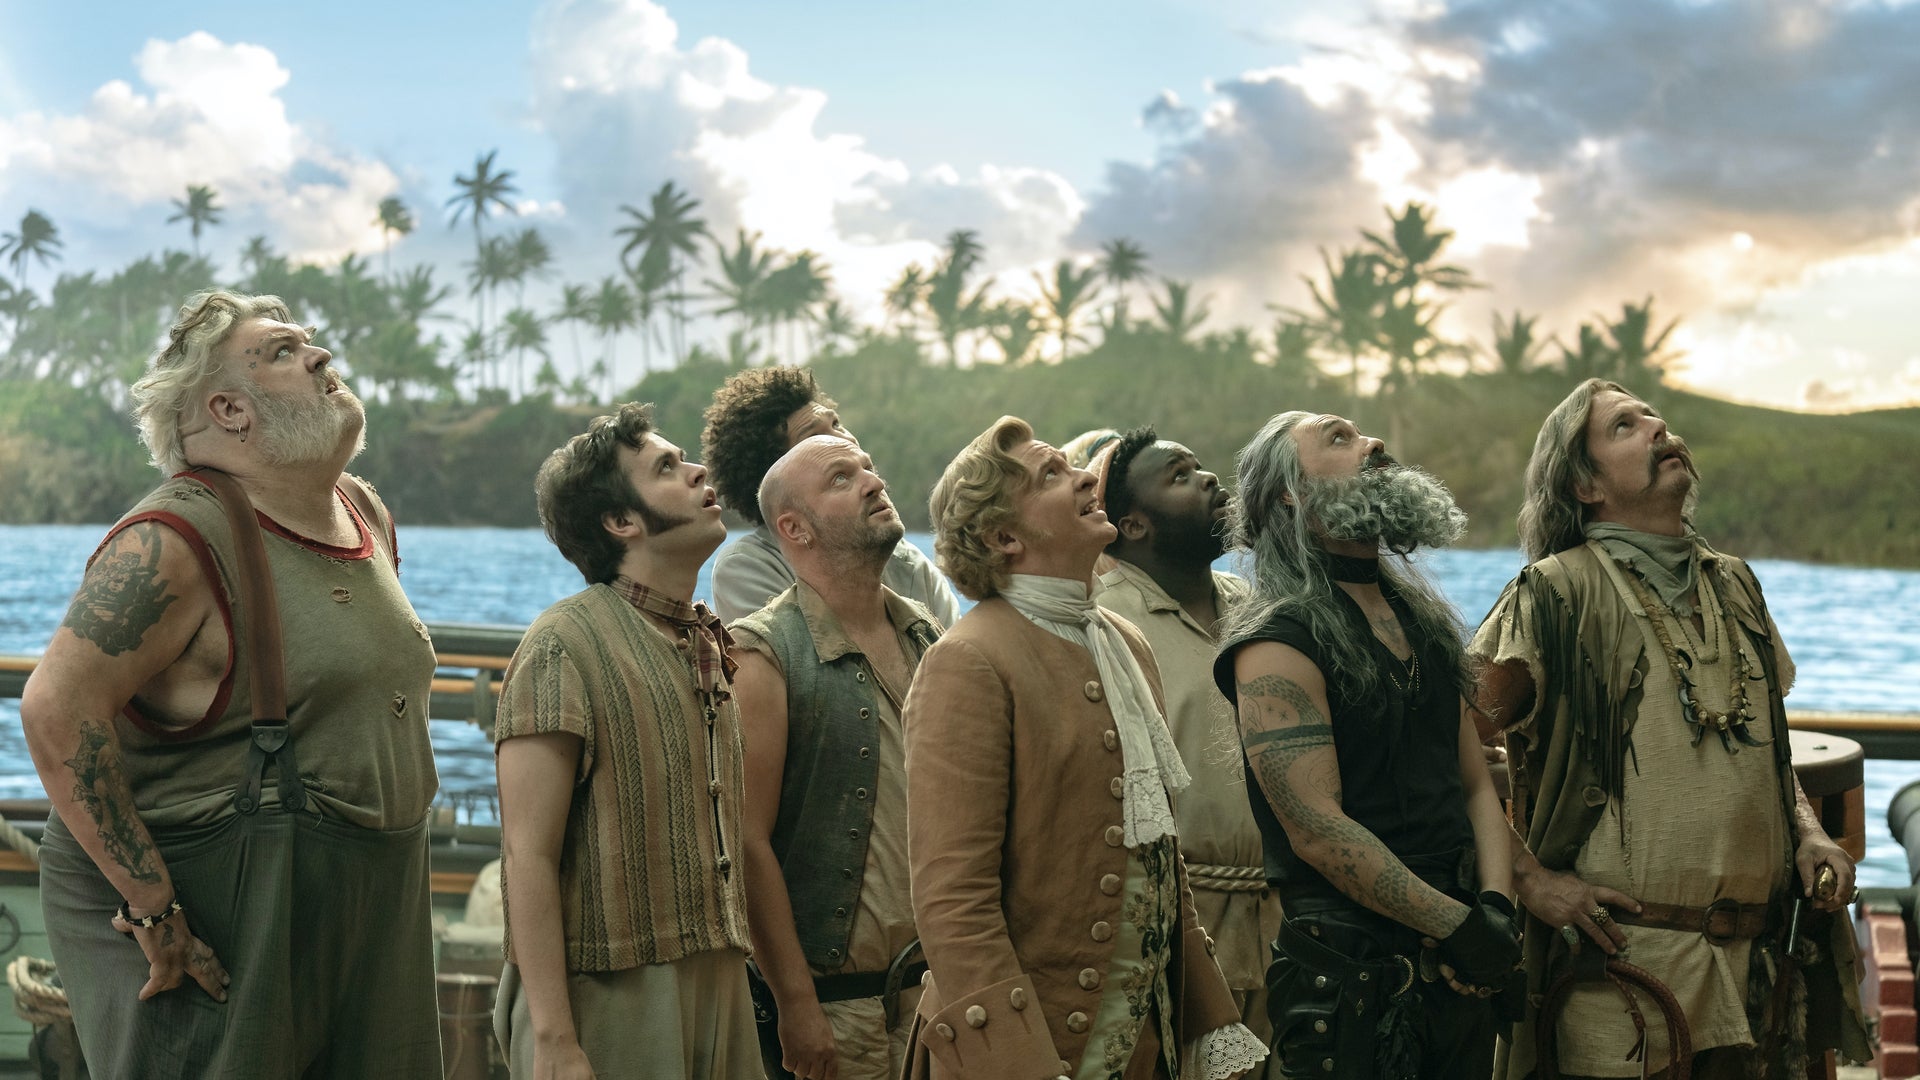 Look at those gay af, funky lil pirates go (Image: Photograph by Aaron Epstein/HBO Max)